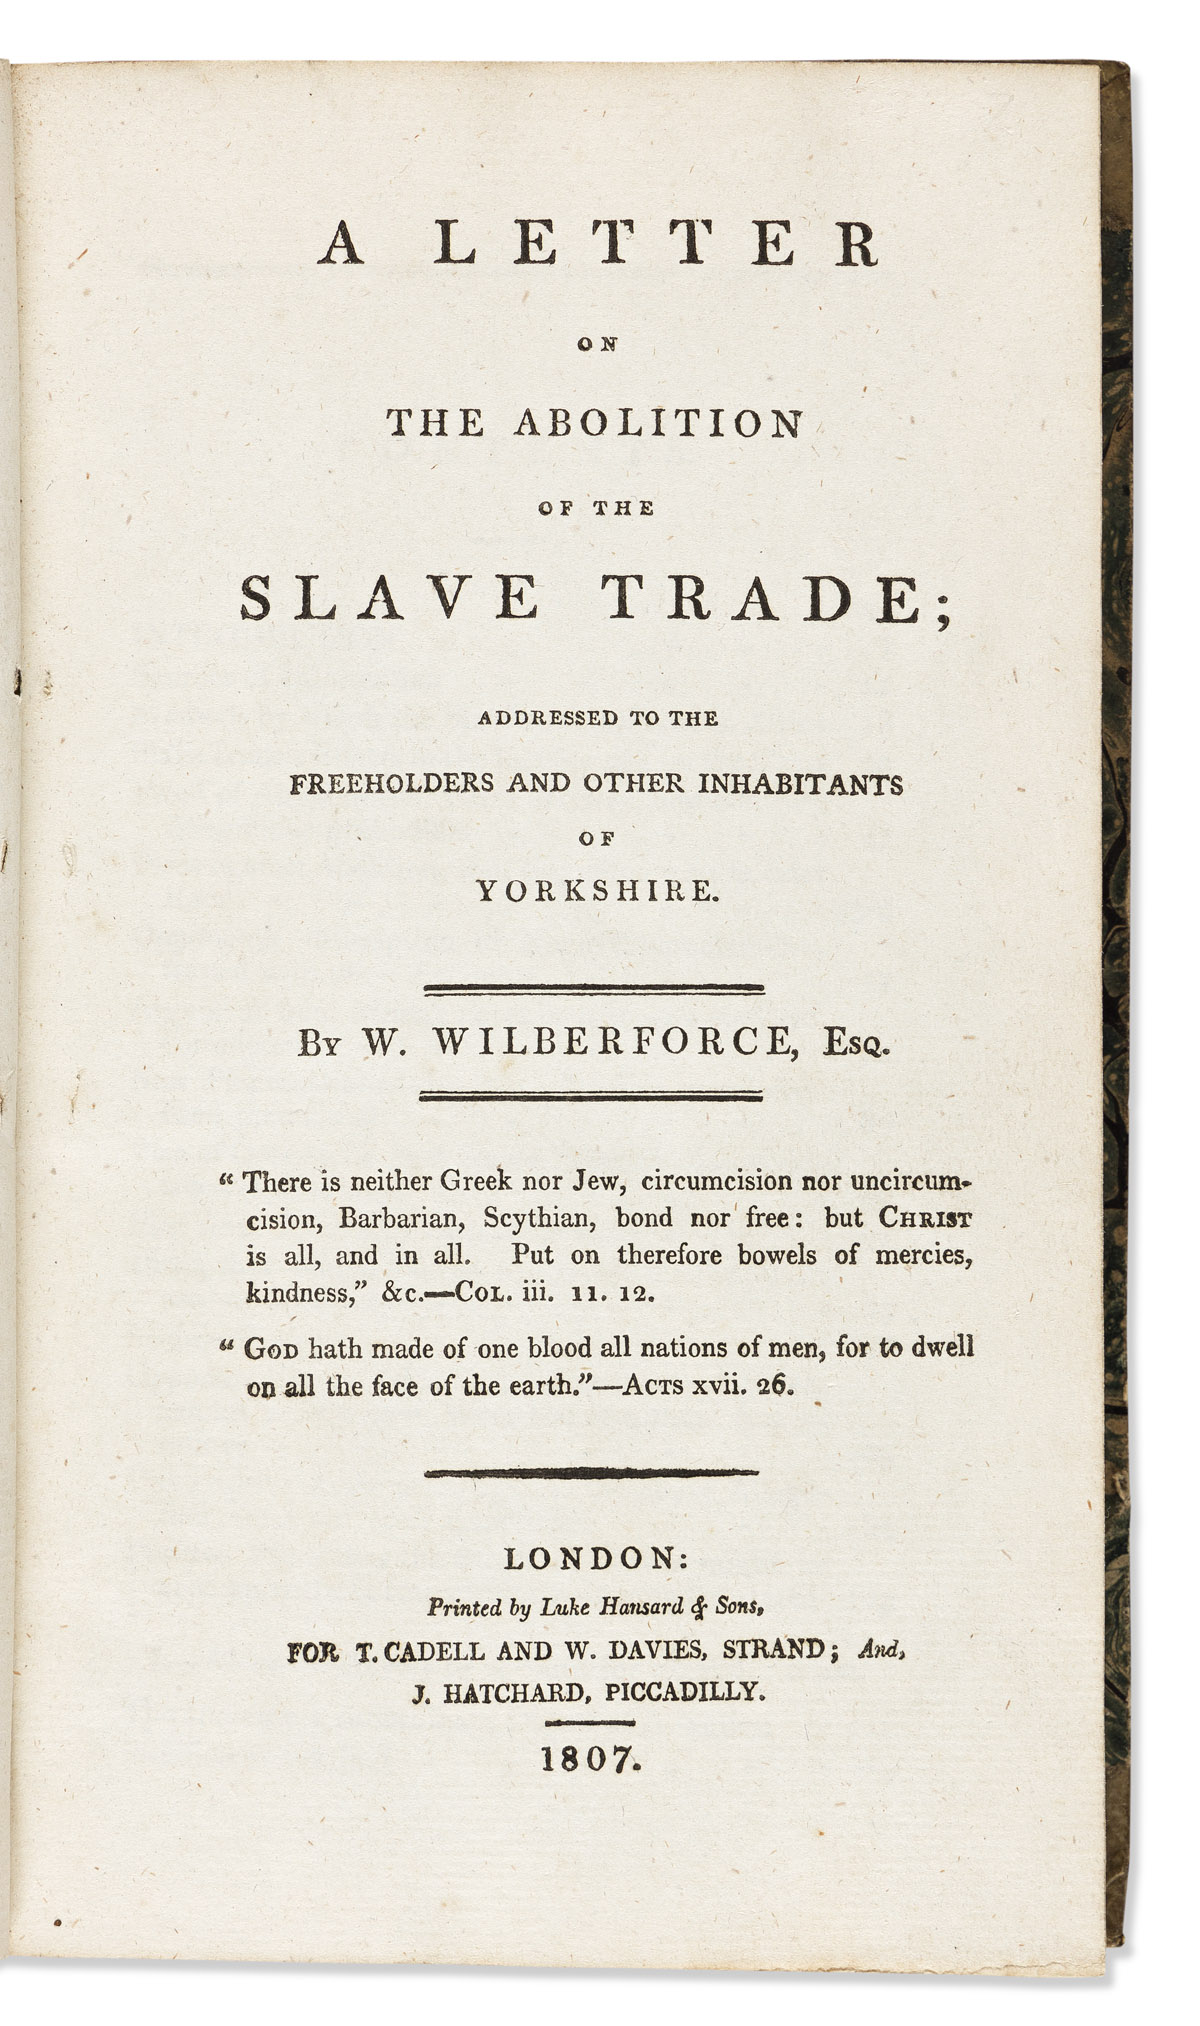 (SLAVERY & ABOLITION.) William Wilberforce. A Letter on the Abolition of the Slave Trade.